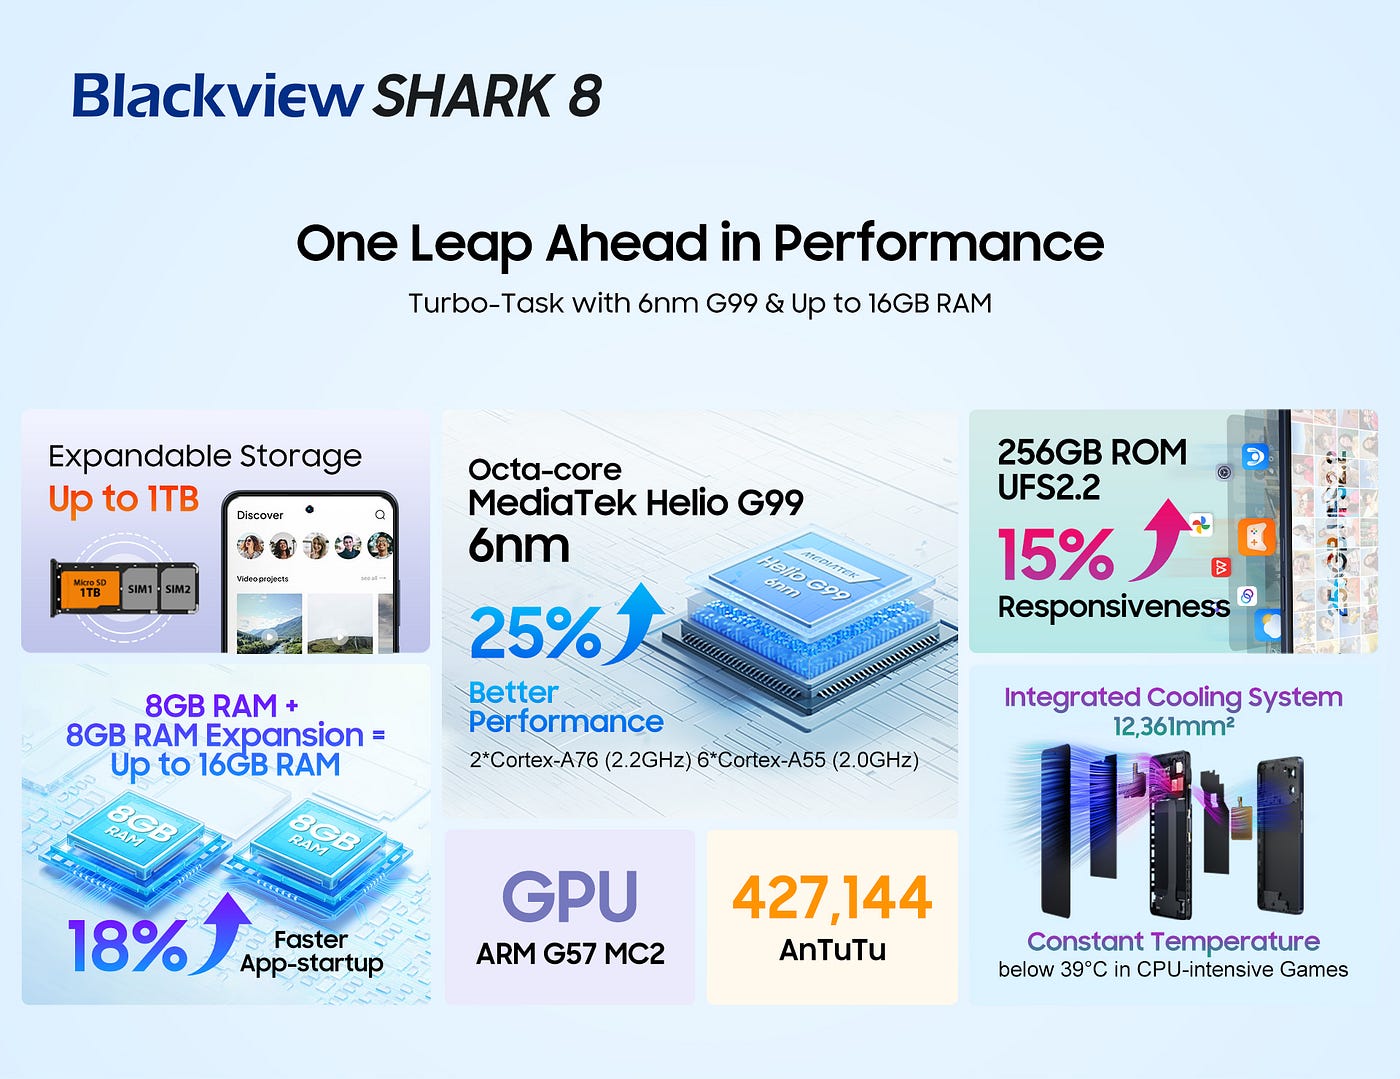 Blackview has Launched the First SHARK Series Model — Blackview SHARK 8!  Tailor-made for Youths, Ultra-fast & Super-clear 64MP Camera with Super PD,  Supported by ArcSoft® 7.0 and Top-tier Performance Backed by